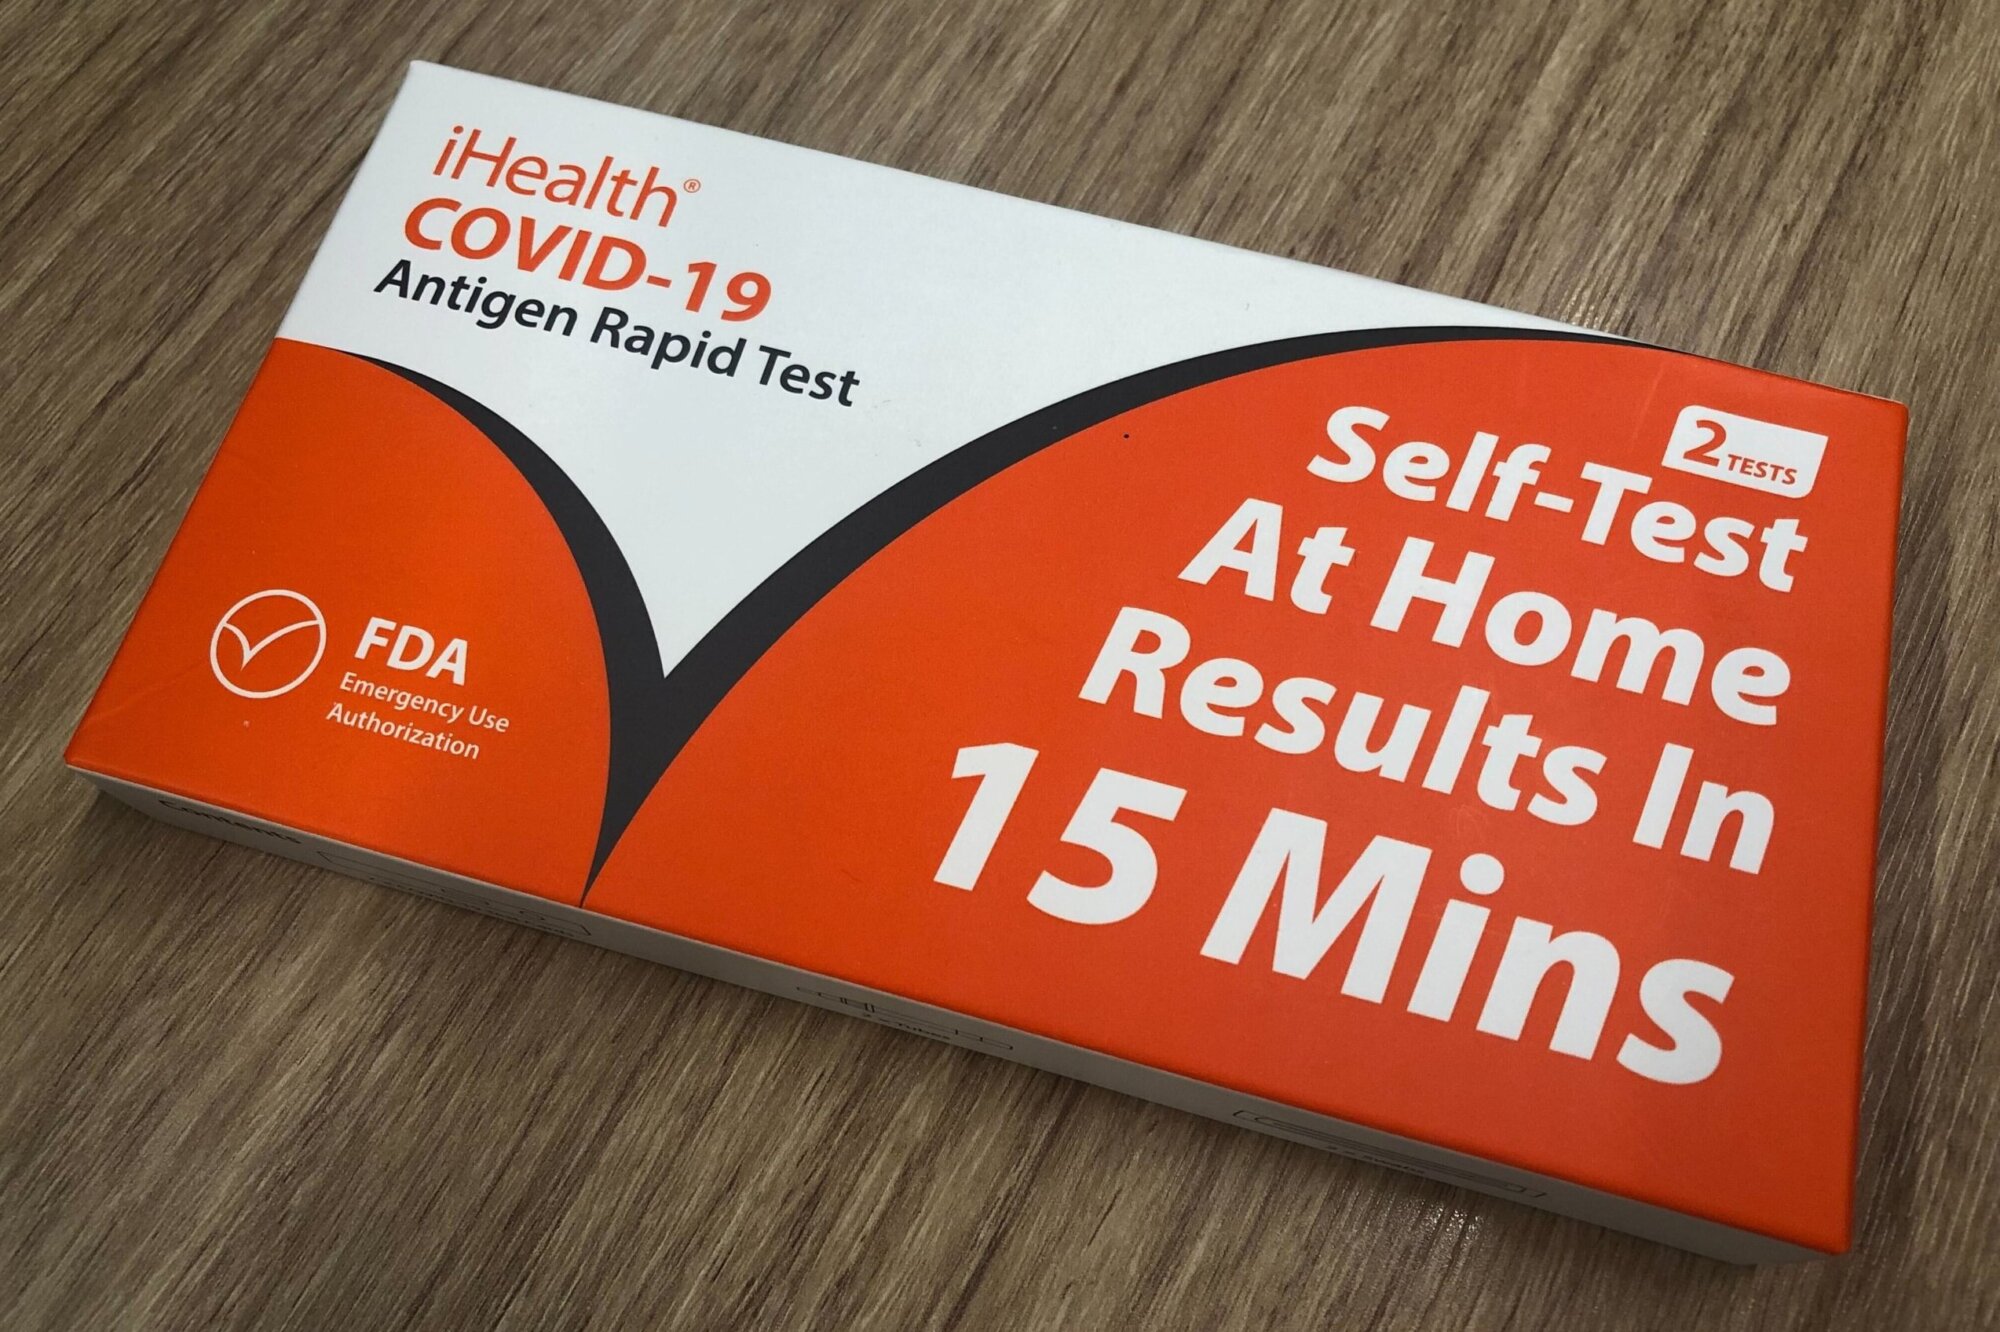 Expiration dates for many athome COVID test kits have been extended